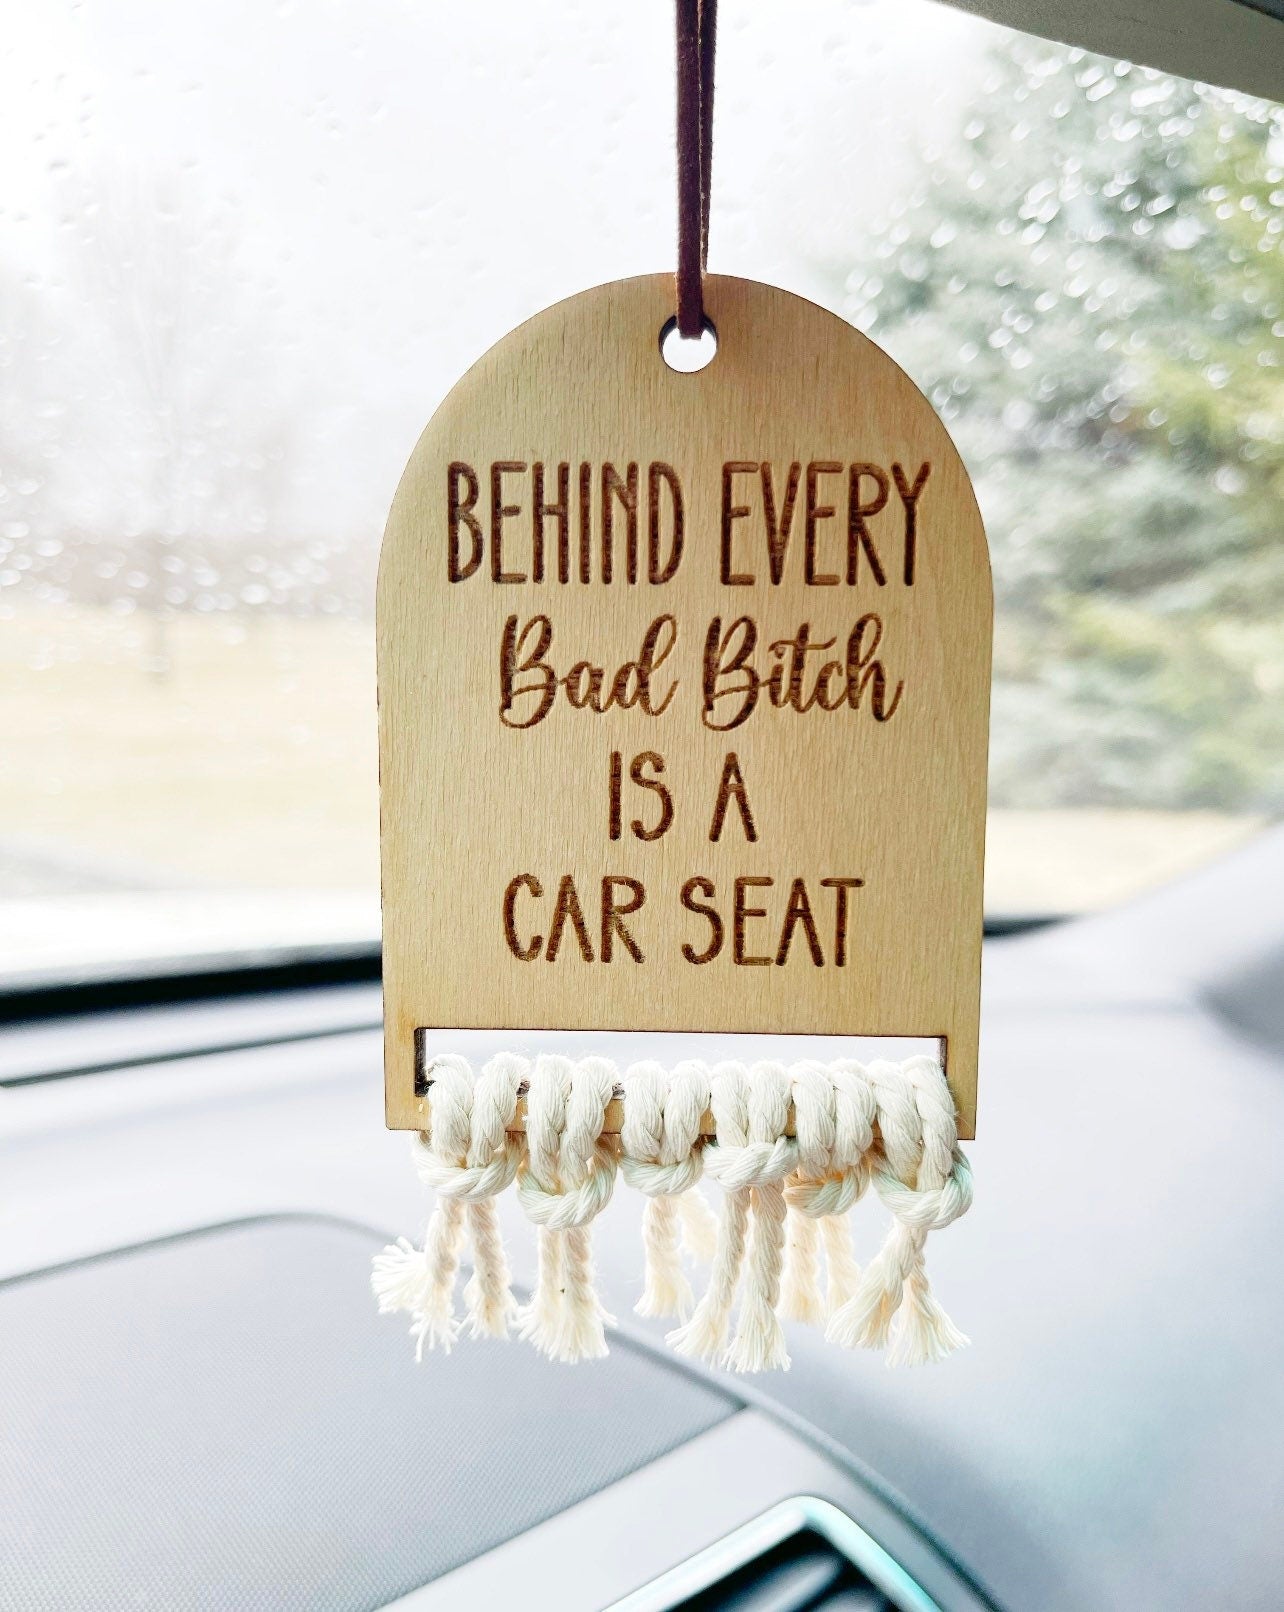 Behind every carseat is a bad bitch hanging mirror wooden sign, wooden sign, macramé sign